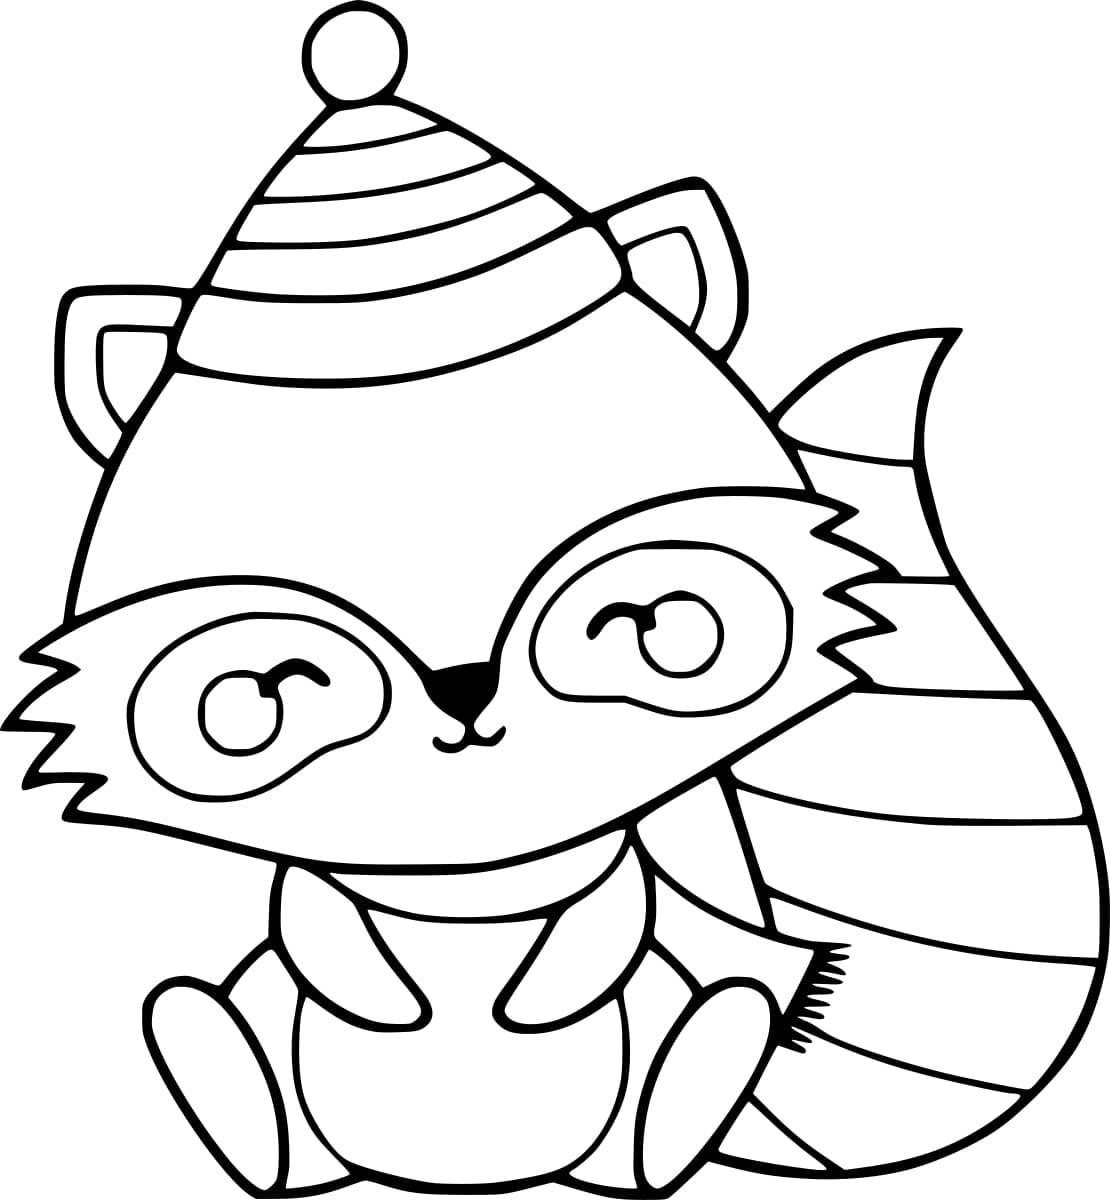 Raccoon Winter Coloring Page for Adults and Kids - Easy Peasy and Fun